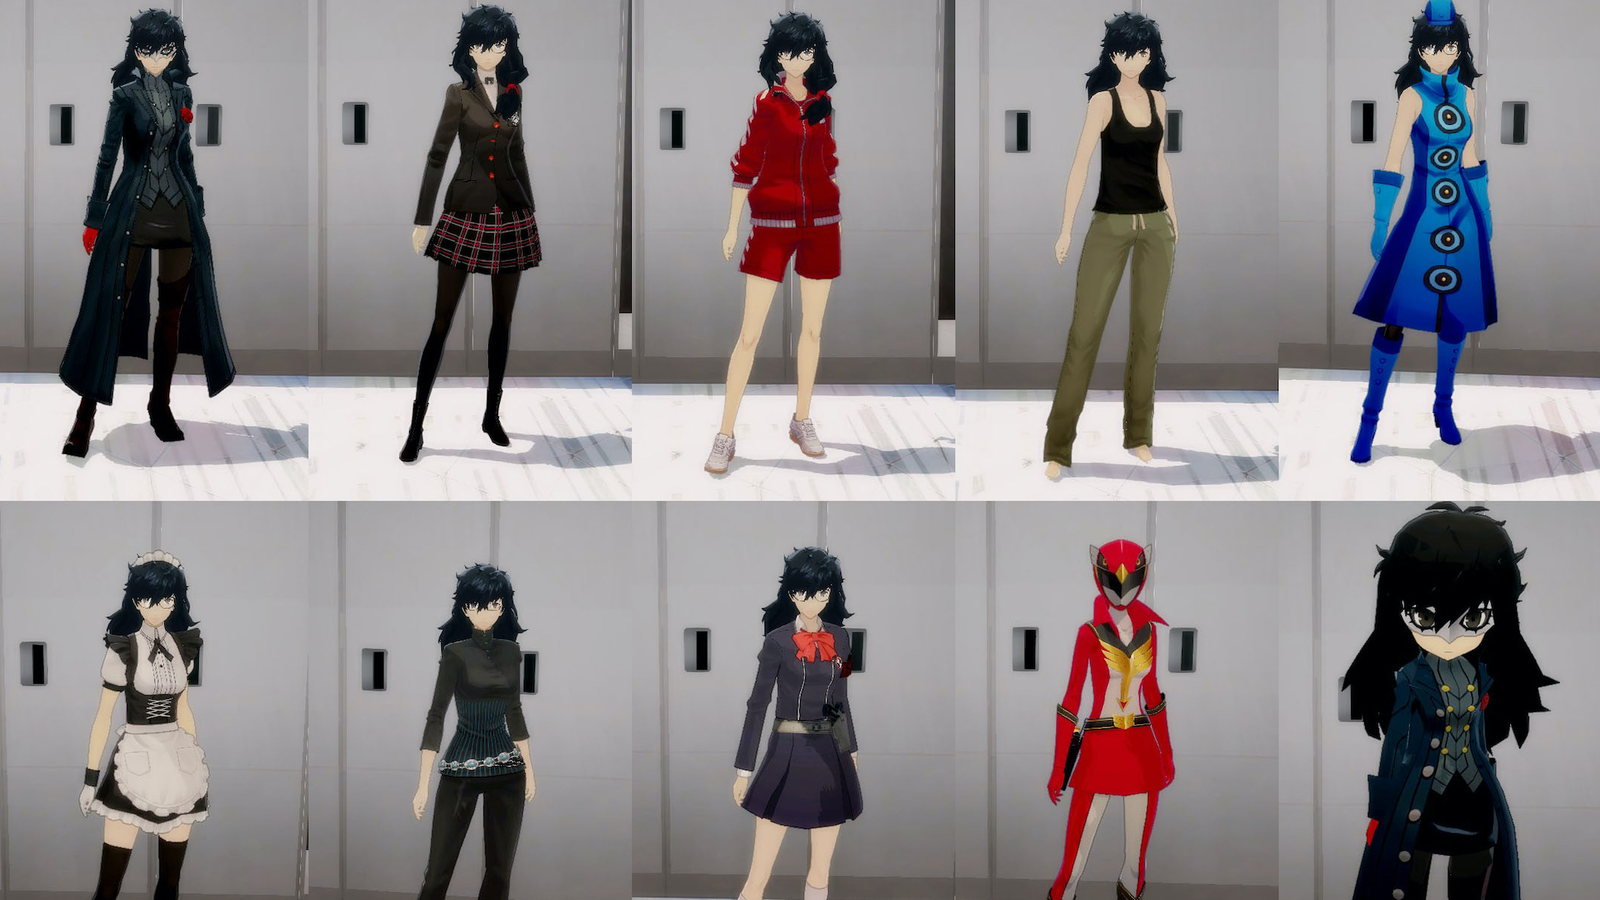 Huge Persona 5 mod offers female protagonist and new romance options